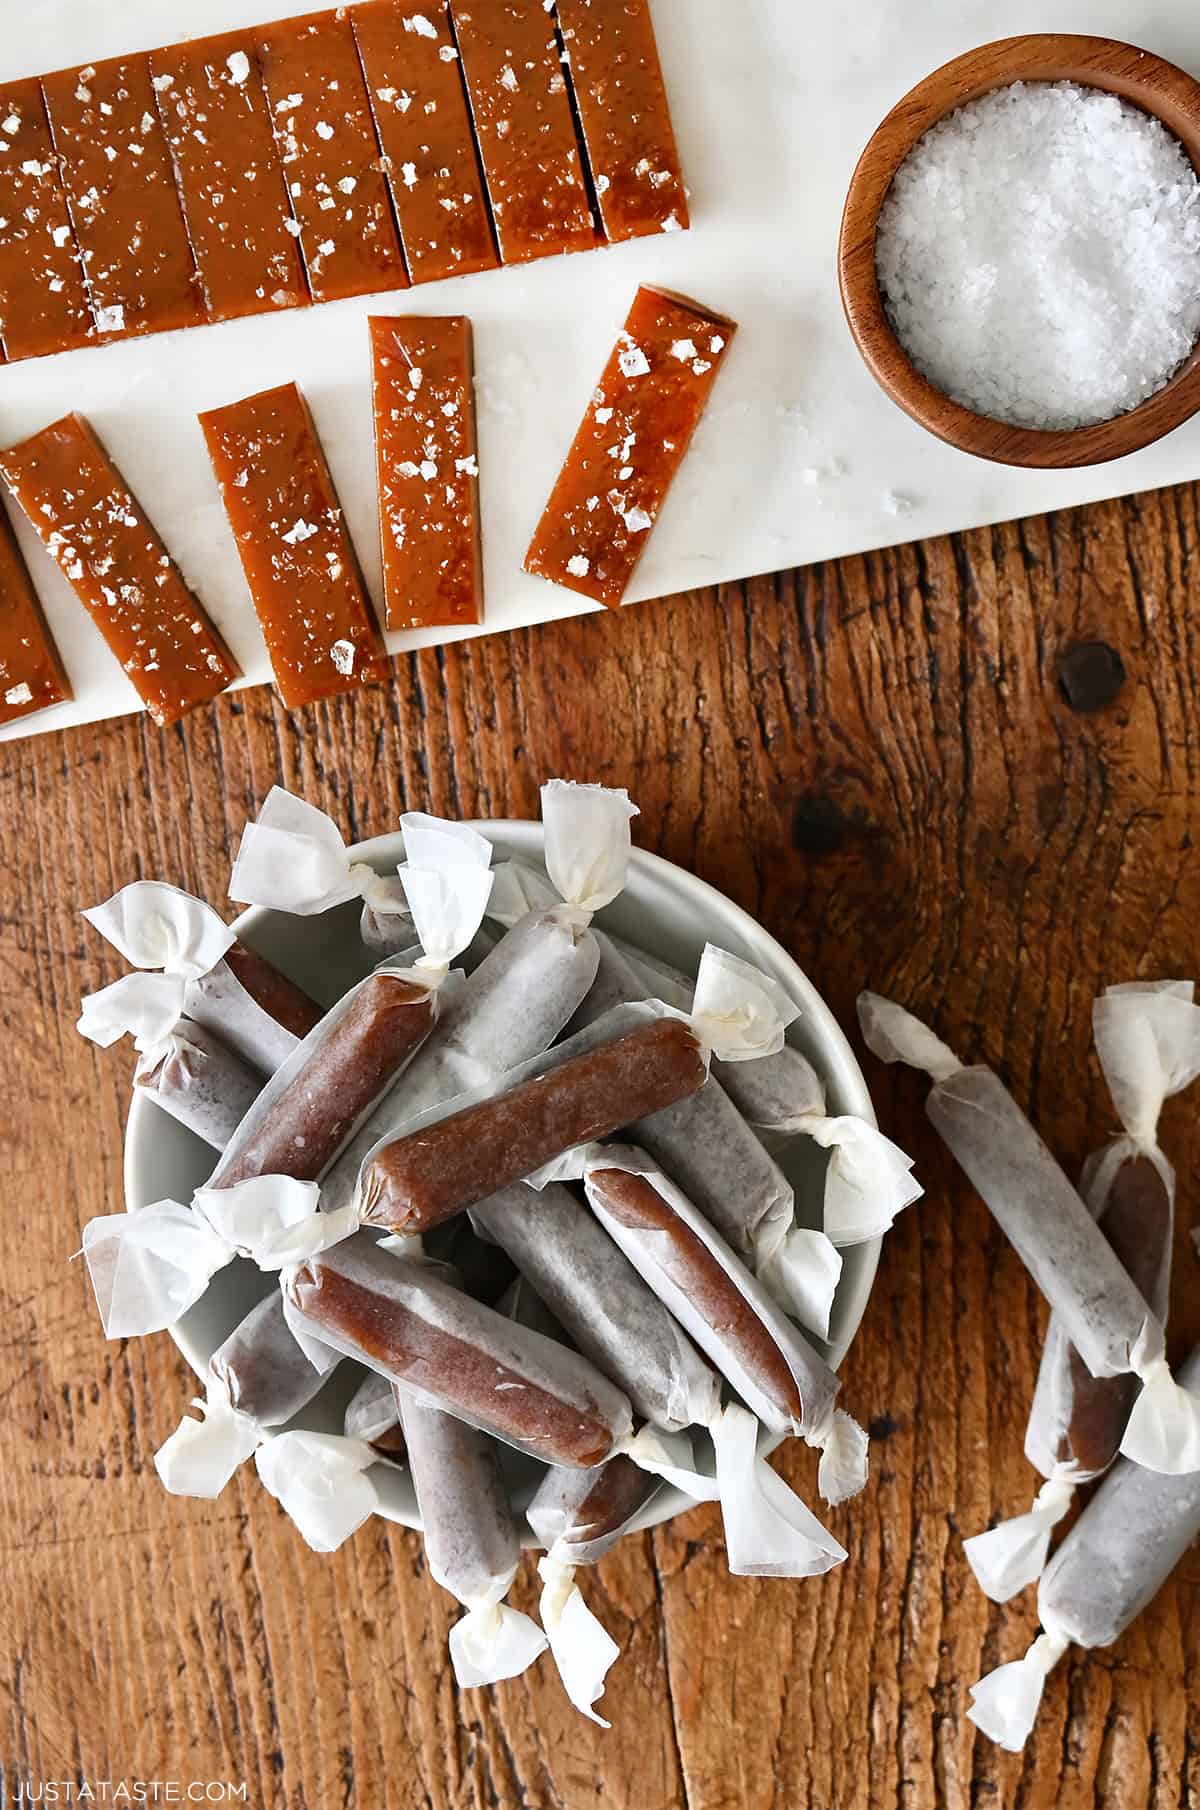 Homemade salted caramels wrapped in wax paper in a bowl next to more caramels topped with large-flake sea salt.